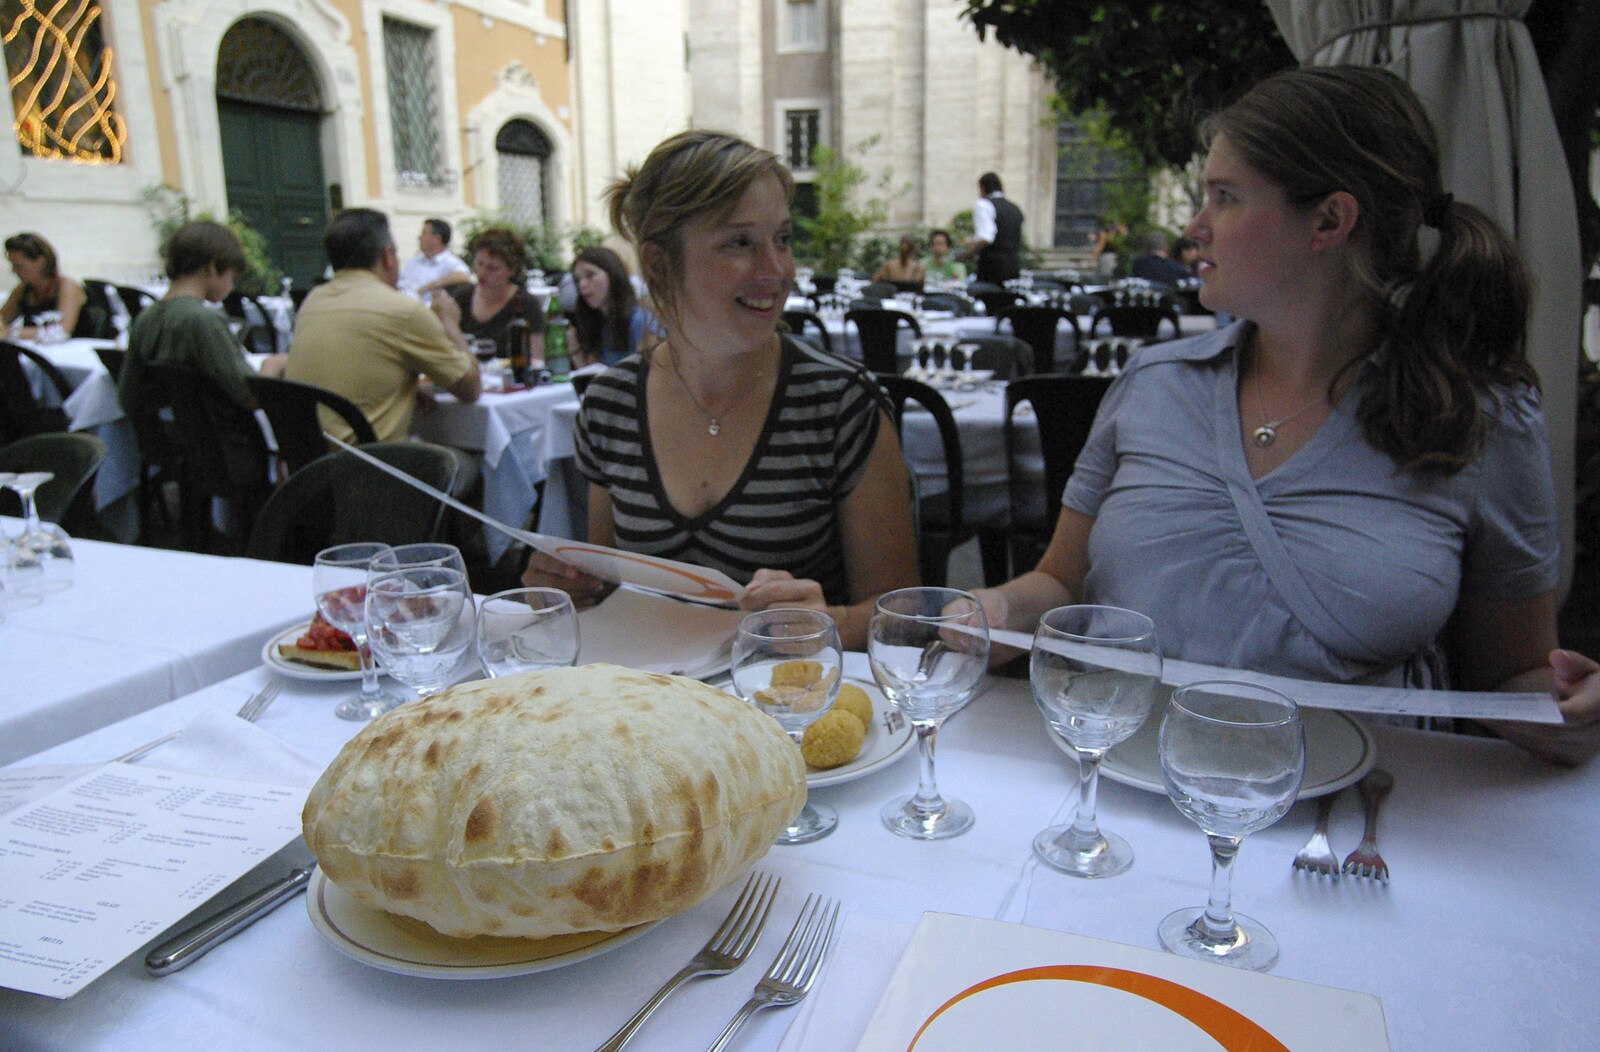 Jules, Isobel and a huge puffy bread-thing from A Sojourn in The Eternal City, Rome, Italy - 22nd July 2008